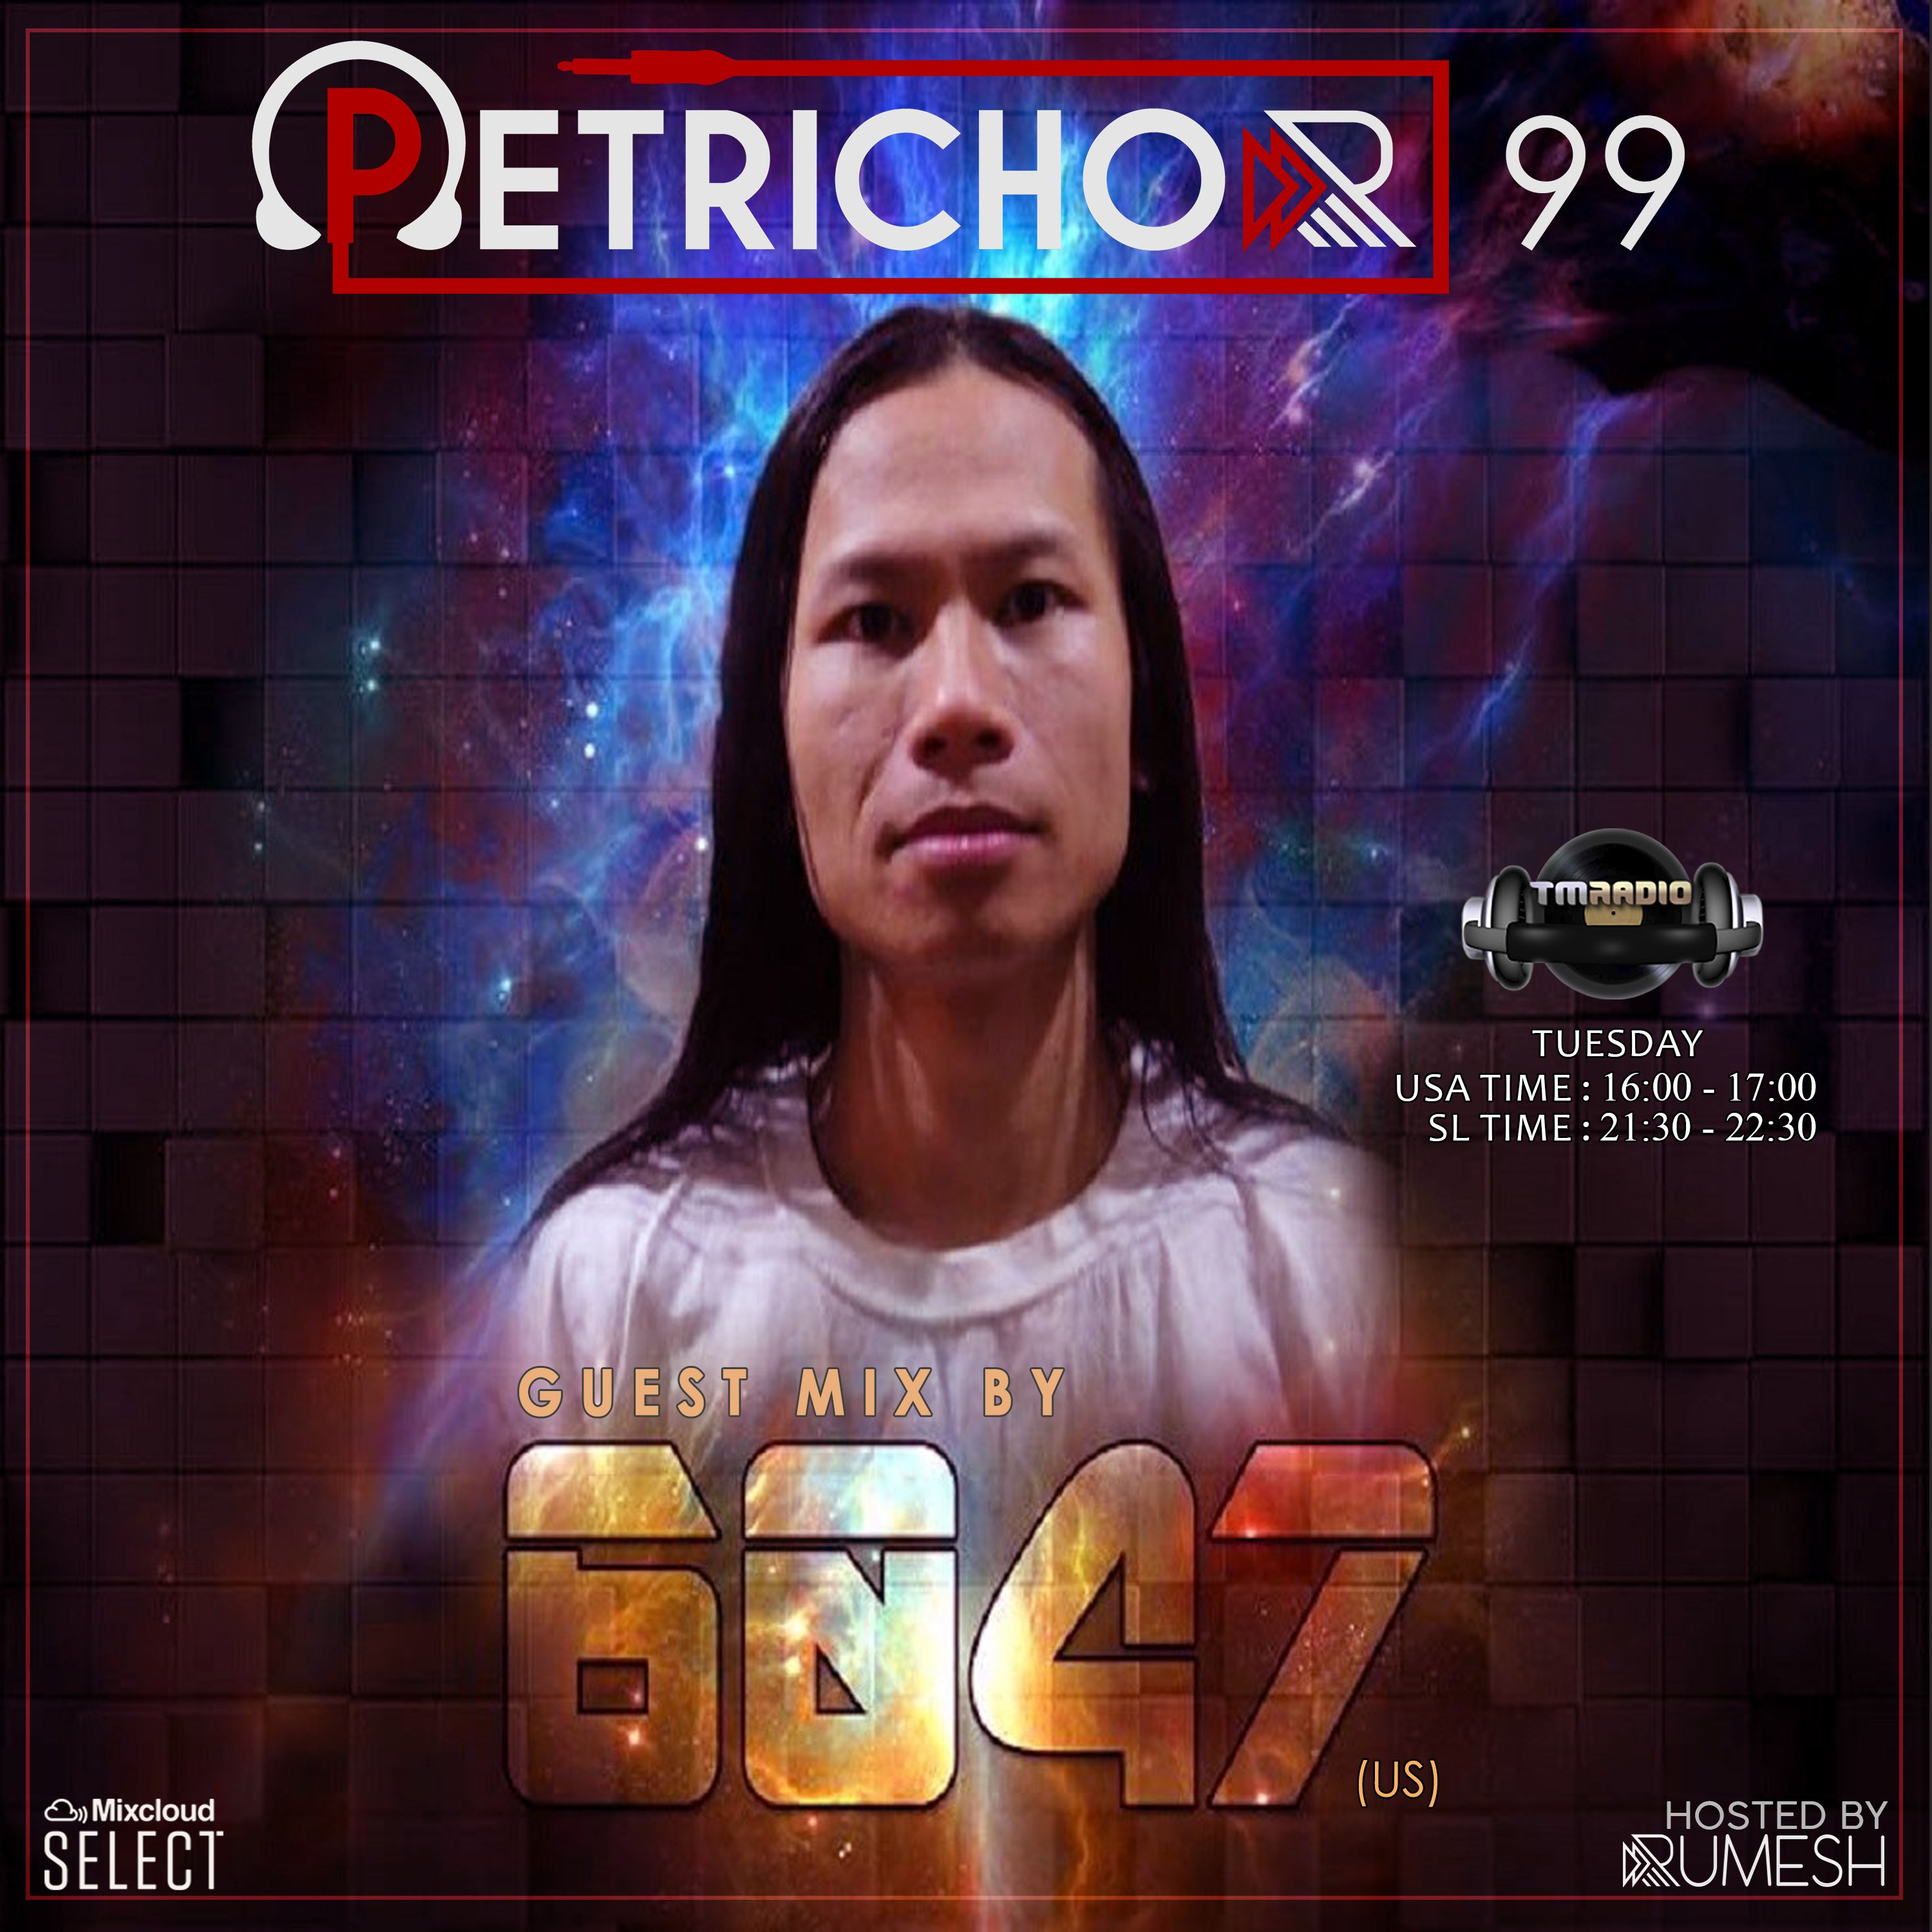 Petrichor :: Petrichor 99 Guest Mix by 6047 (US) (aired on February 2nd, 2021) banner logo